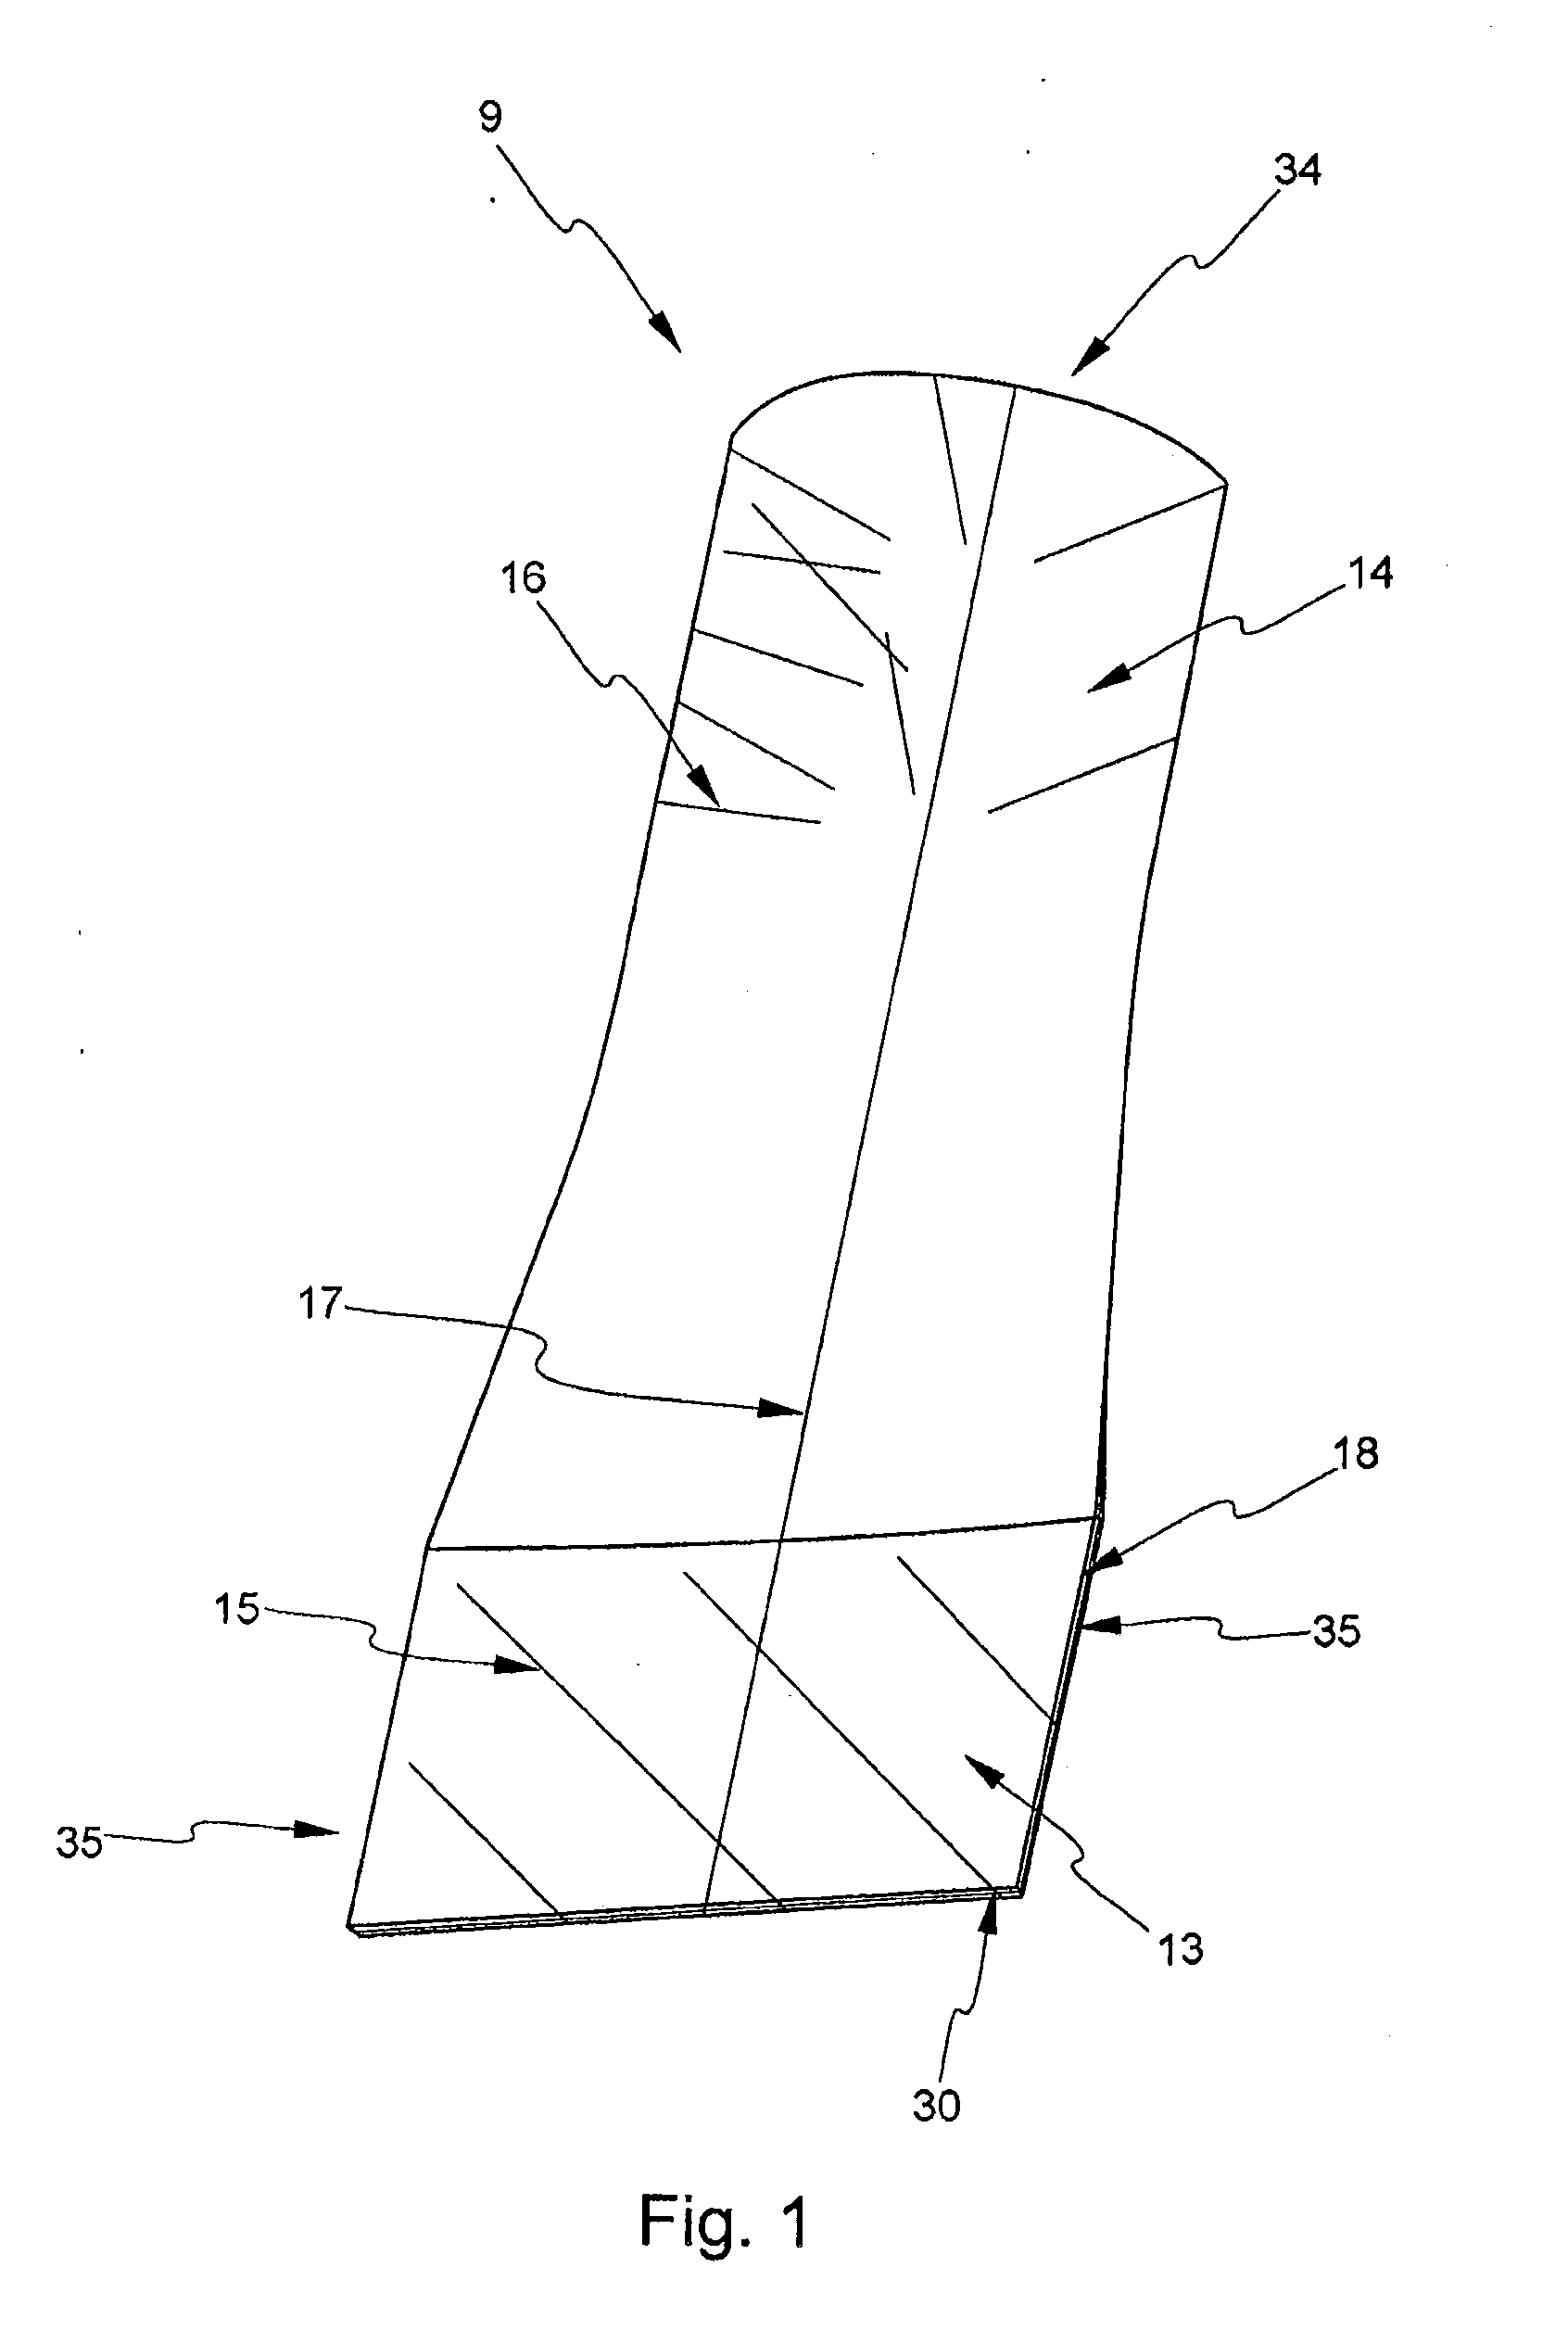 Support structure for a wing